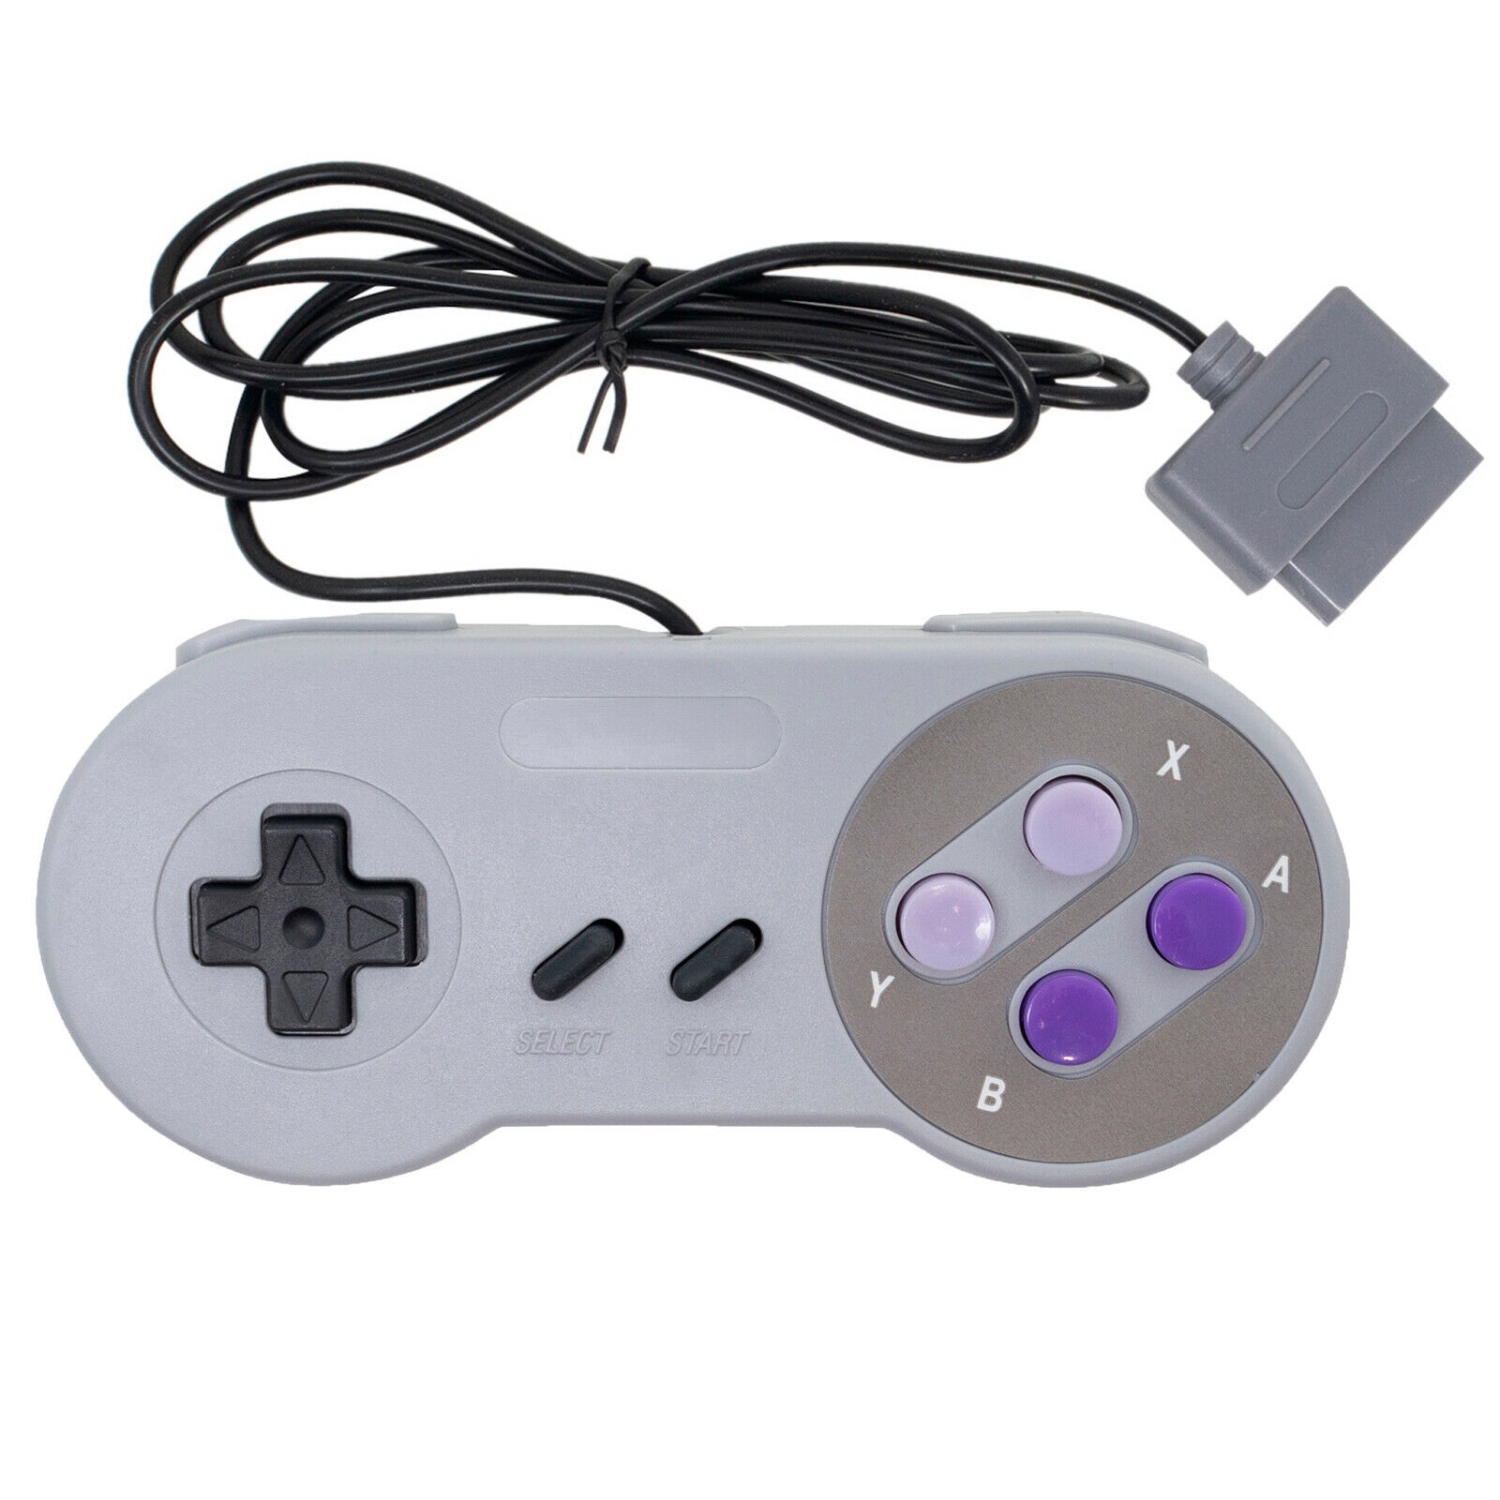 New Wired Controller Gamepad For Nintendo SNES and Super Famicom SFC Console